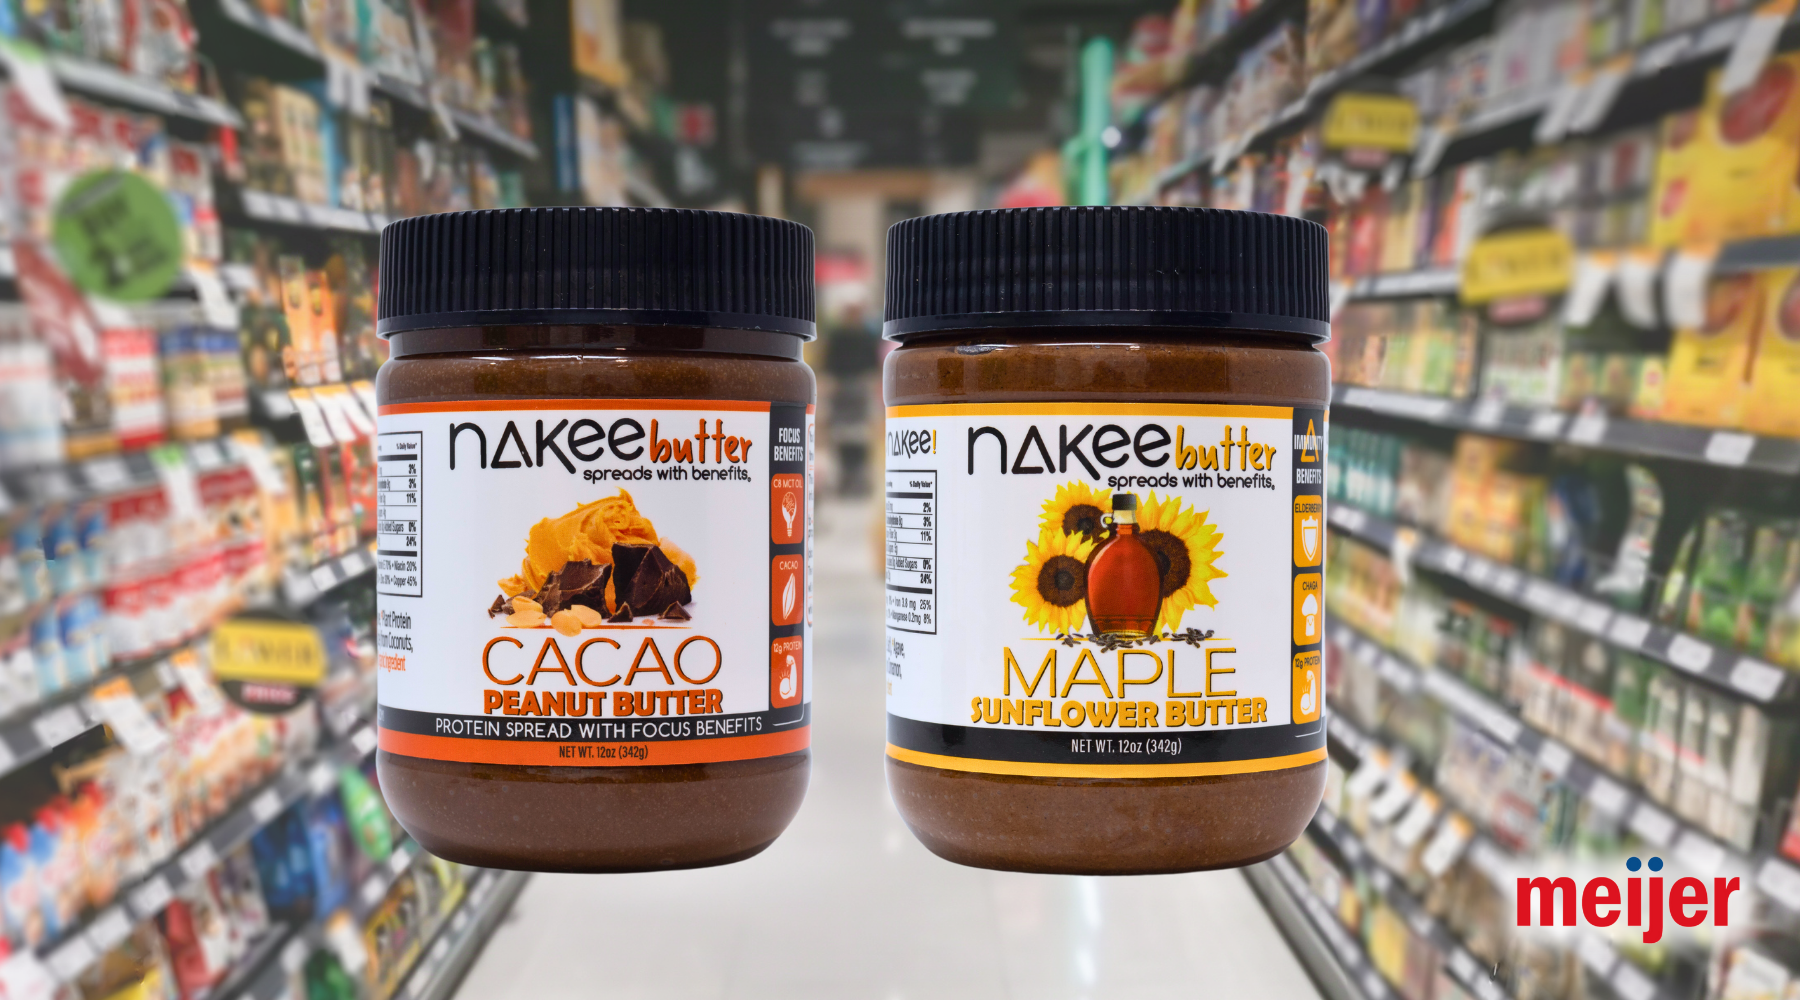 Nakee Butter Jars at Meijer!